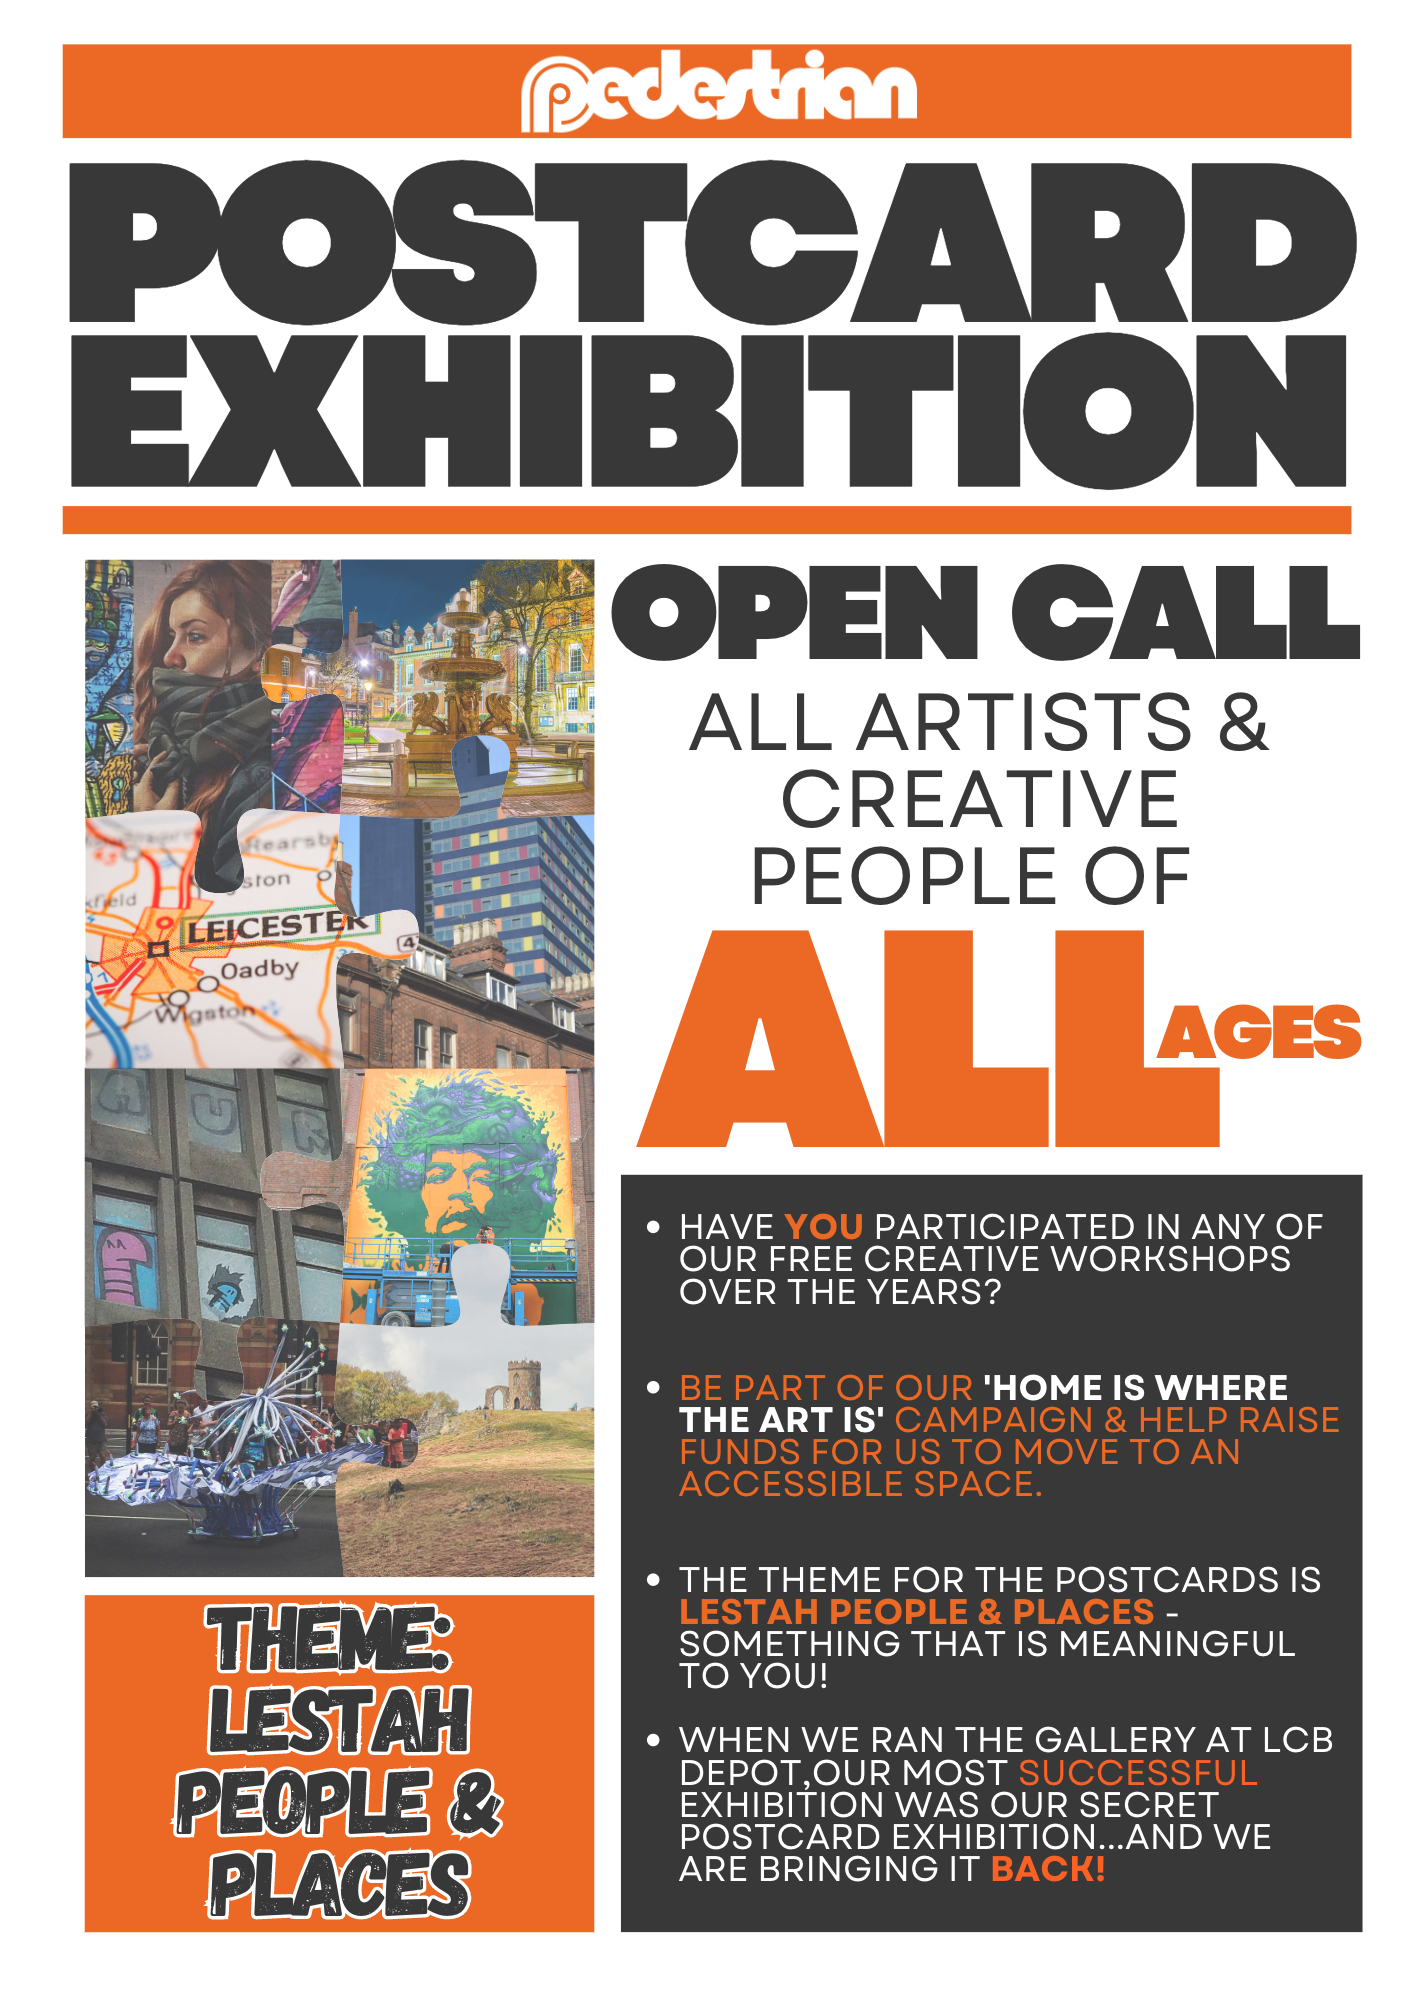 Postcard Exhibition - open to all artistis & creative people of all ages.